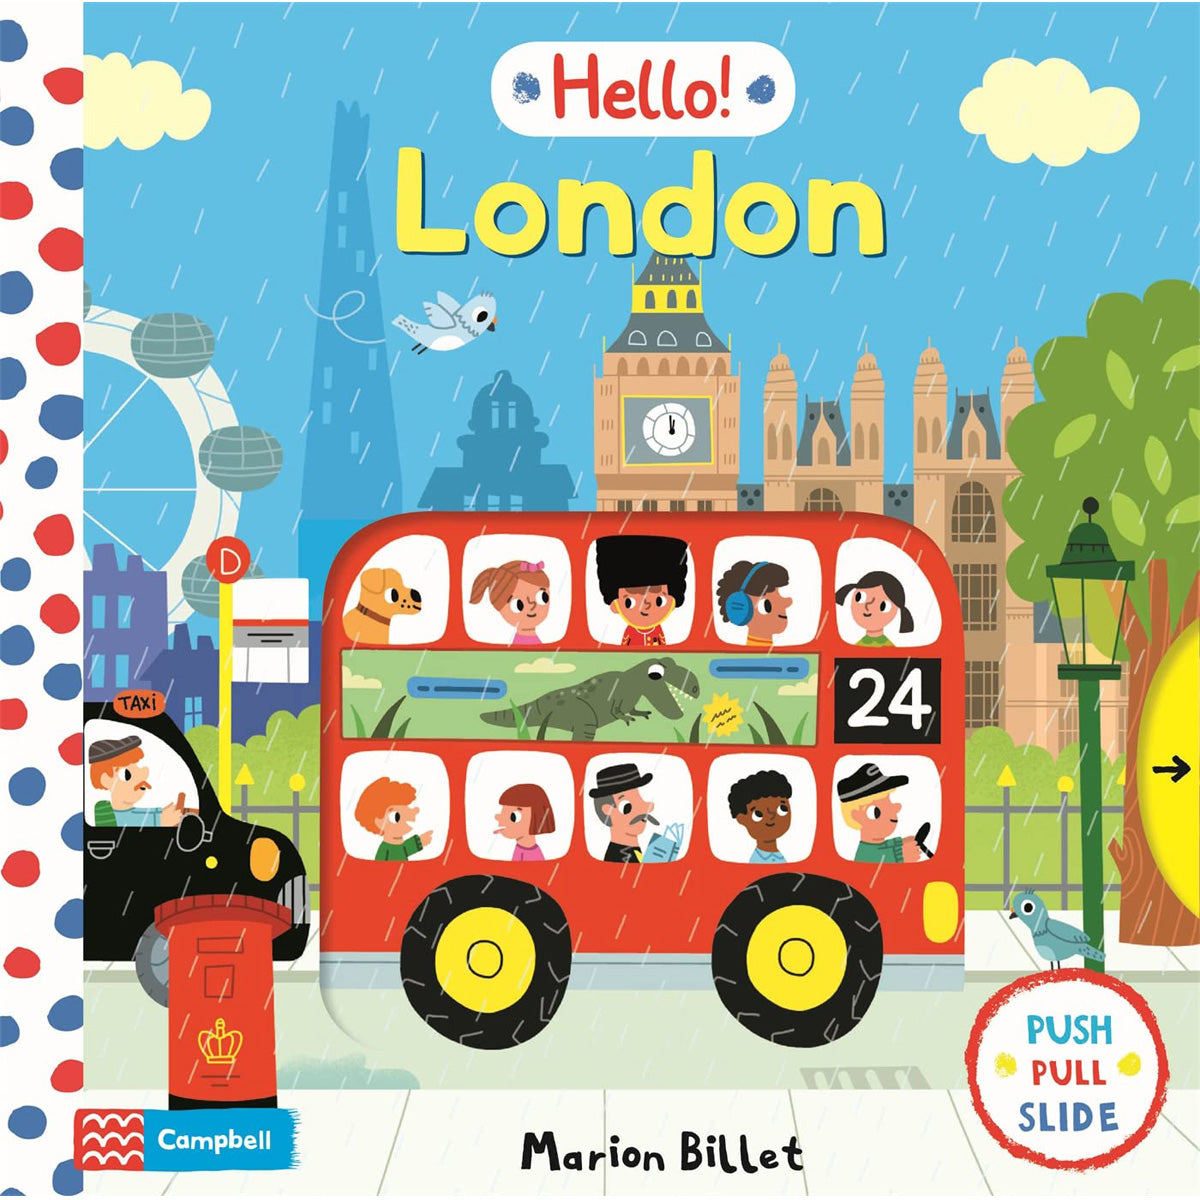 Hello! London Book by Marion Billet